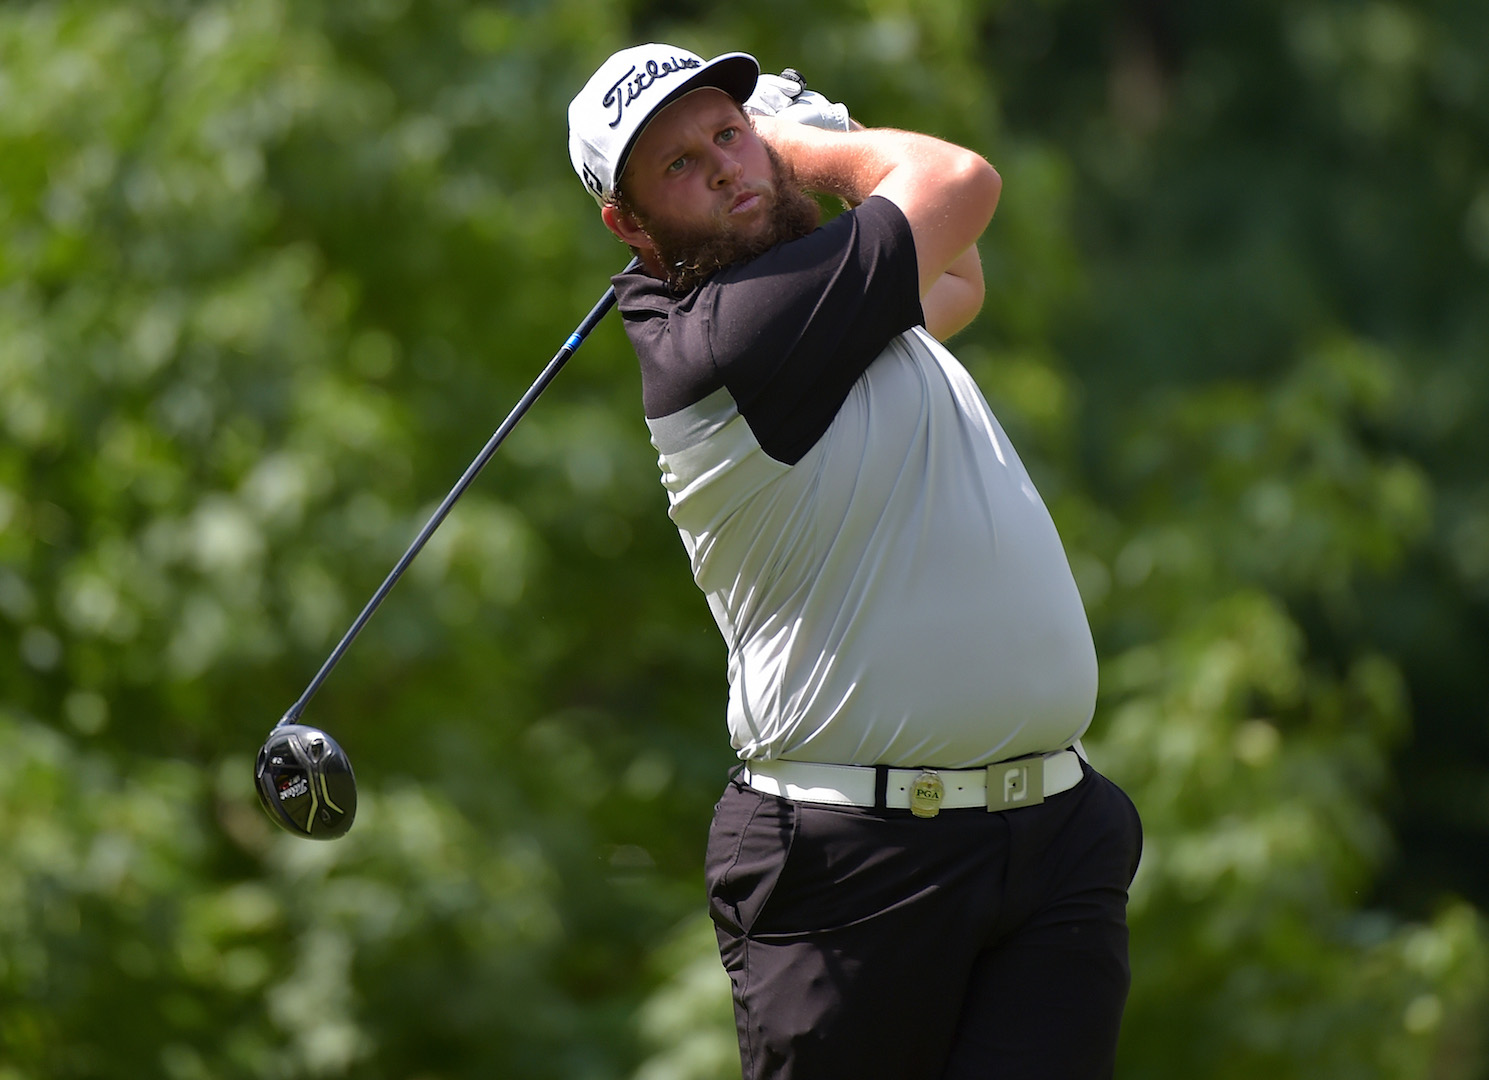 SPRINGFIELD, NJ - JULY 29: Andrew Johnston of England plays his shot from the third tee during the second round of the 2016 PGA Championship at Baltusrol Golf Club on July 29, 2016 in Springfield, New Jersey. (Photo by Drew Hallowell/Getty Images)